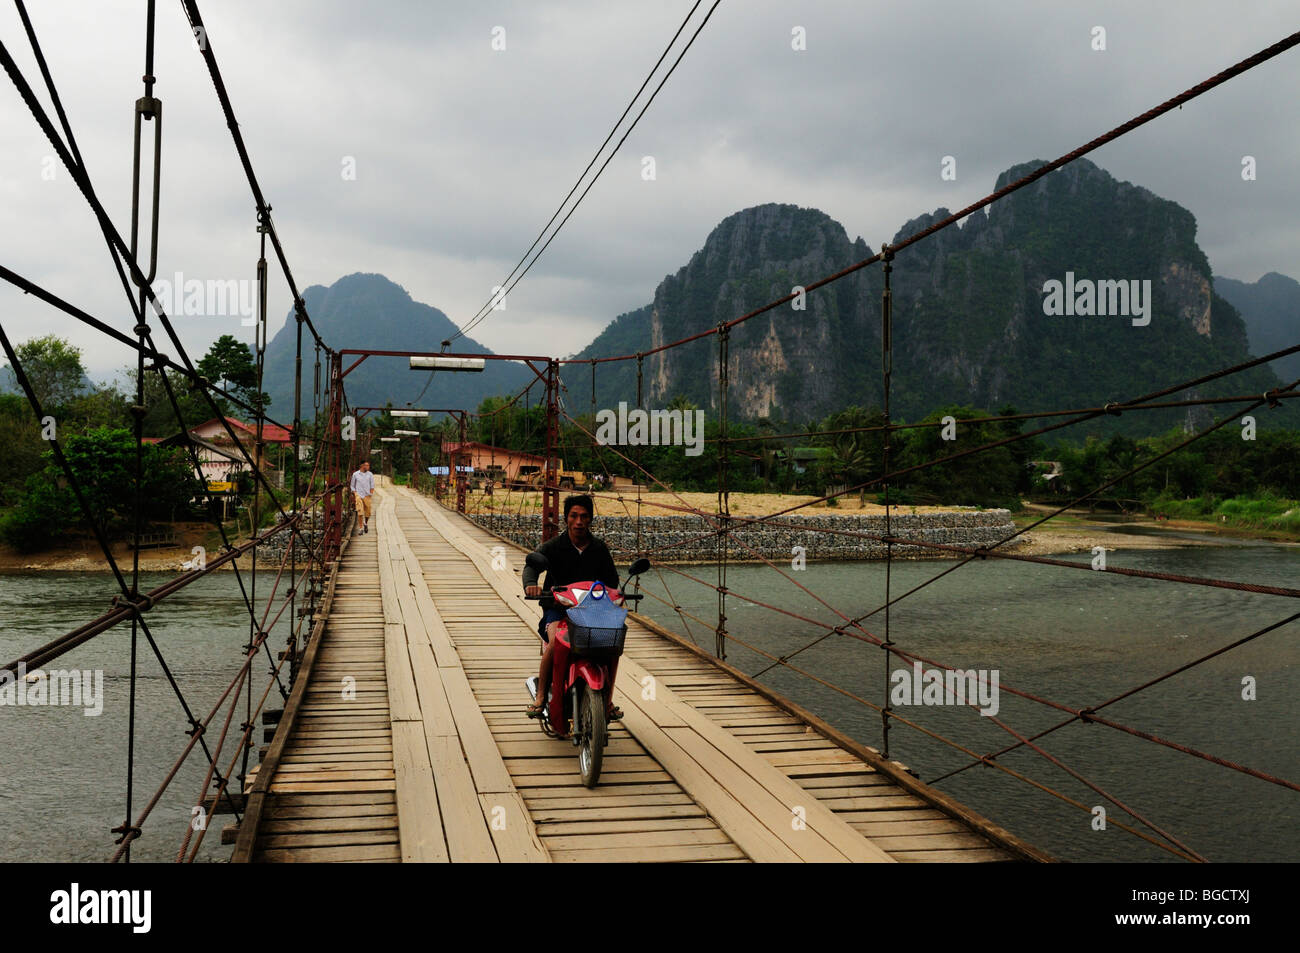 Laos; Vang Vieng; Mororcycle crossing on the bridge over the Nam Song River Stock Photo